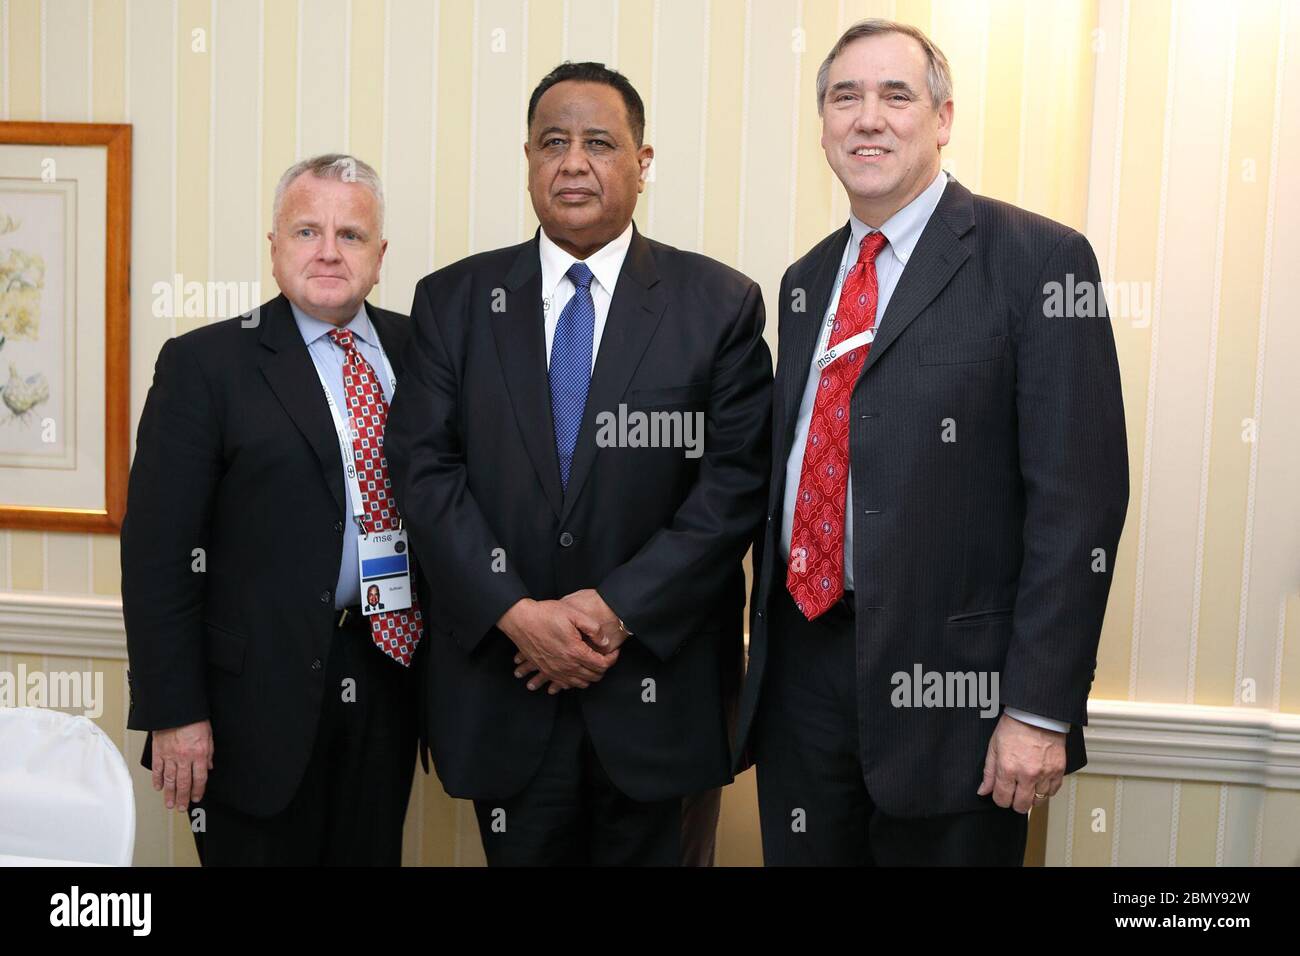 Deputy Secretary Sullivan Meets With Sudanese Foreign Minister Ghandour and U.S. Senator Merkley Deputy Secretary of State John Sullivan meets with Sudanese Foreign Minister Ibrahim Ghandour and U.S. Senator Jeff Merkley at the Munich Security Conference in Munich, Germany on February 16, 2018. Stock Photo